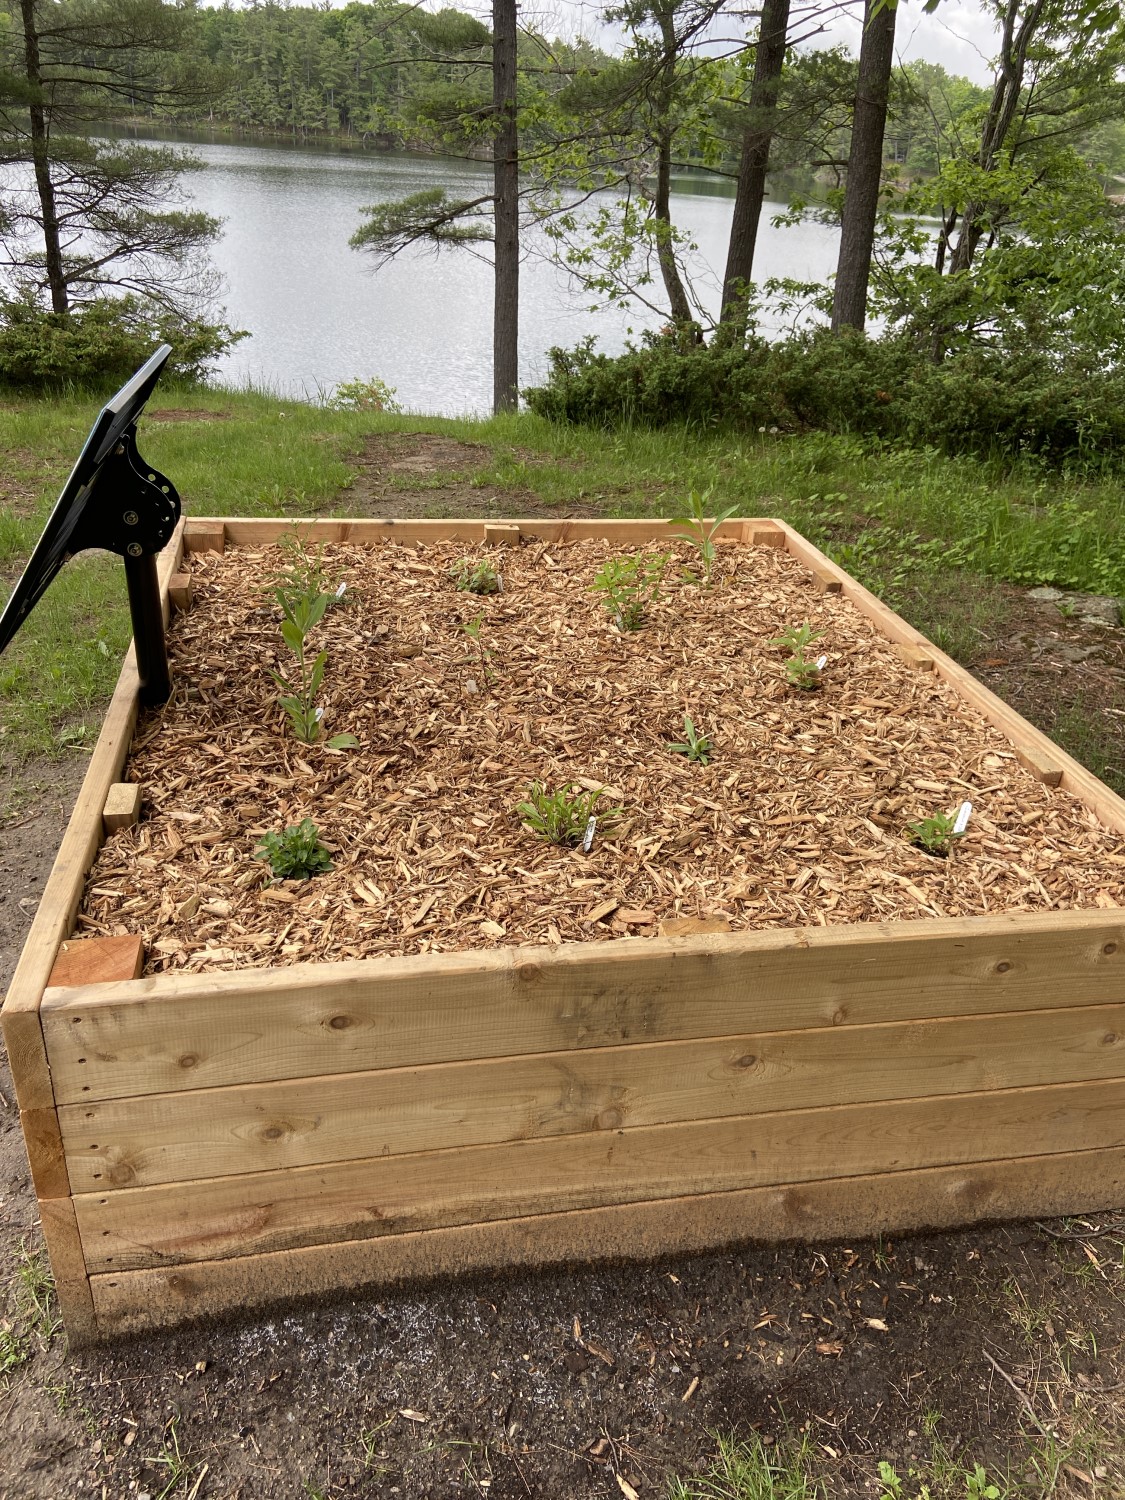 A raised garden bed made out of wood with three rows of small plants surrounded by mulch.